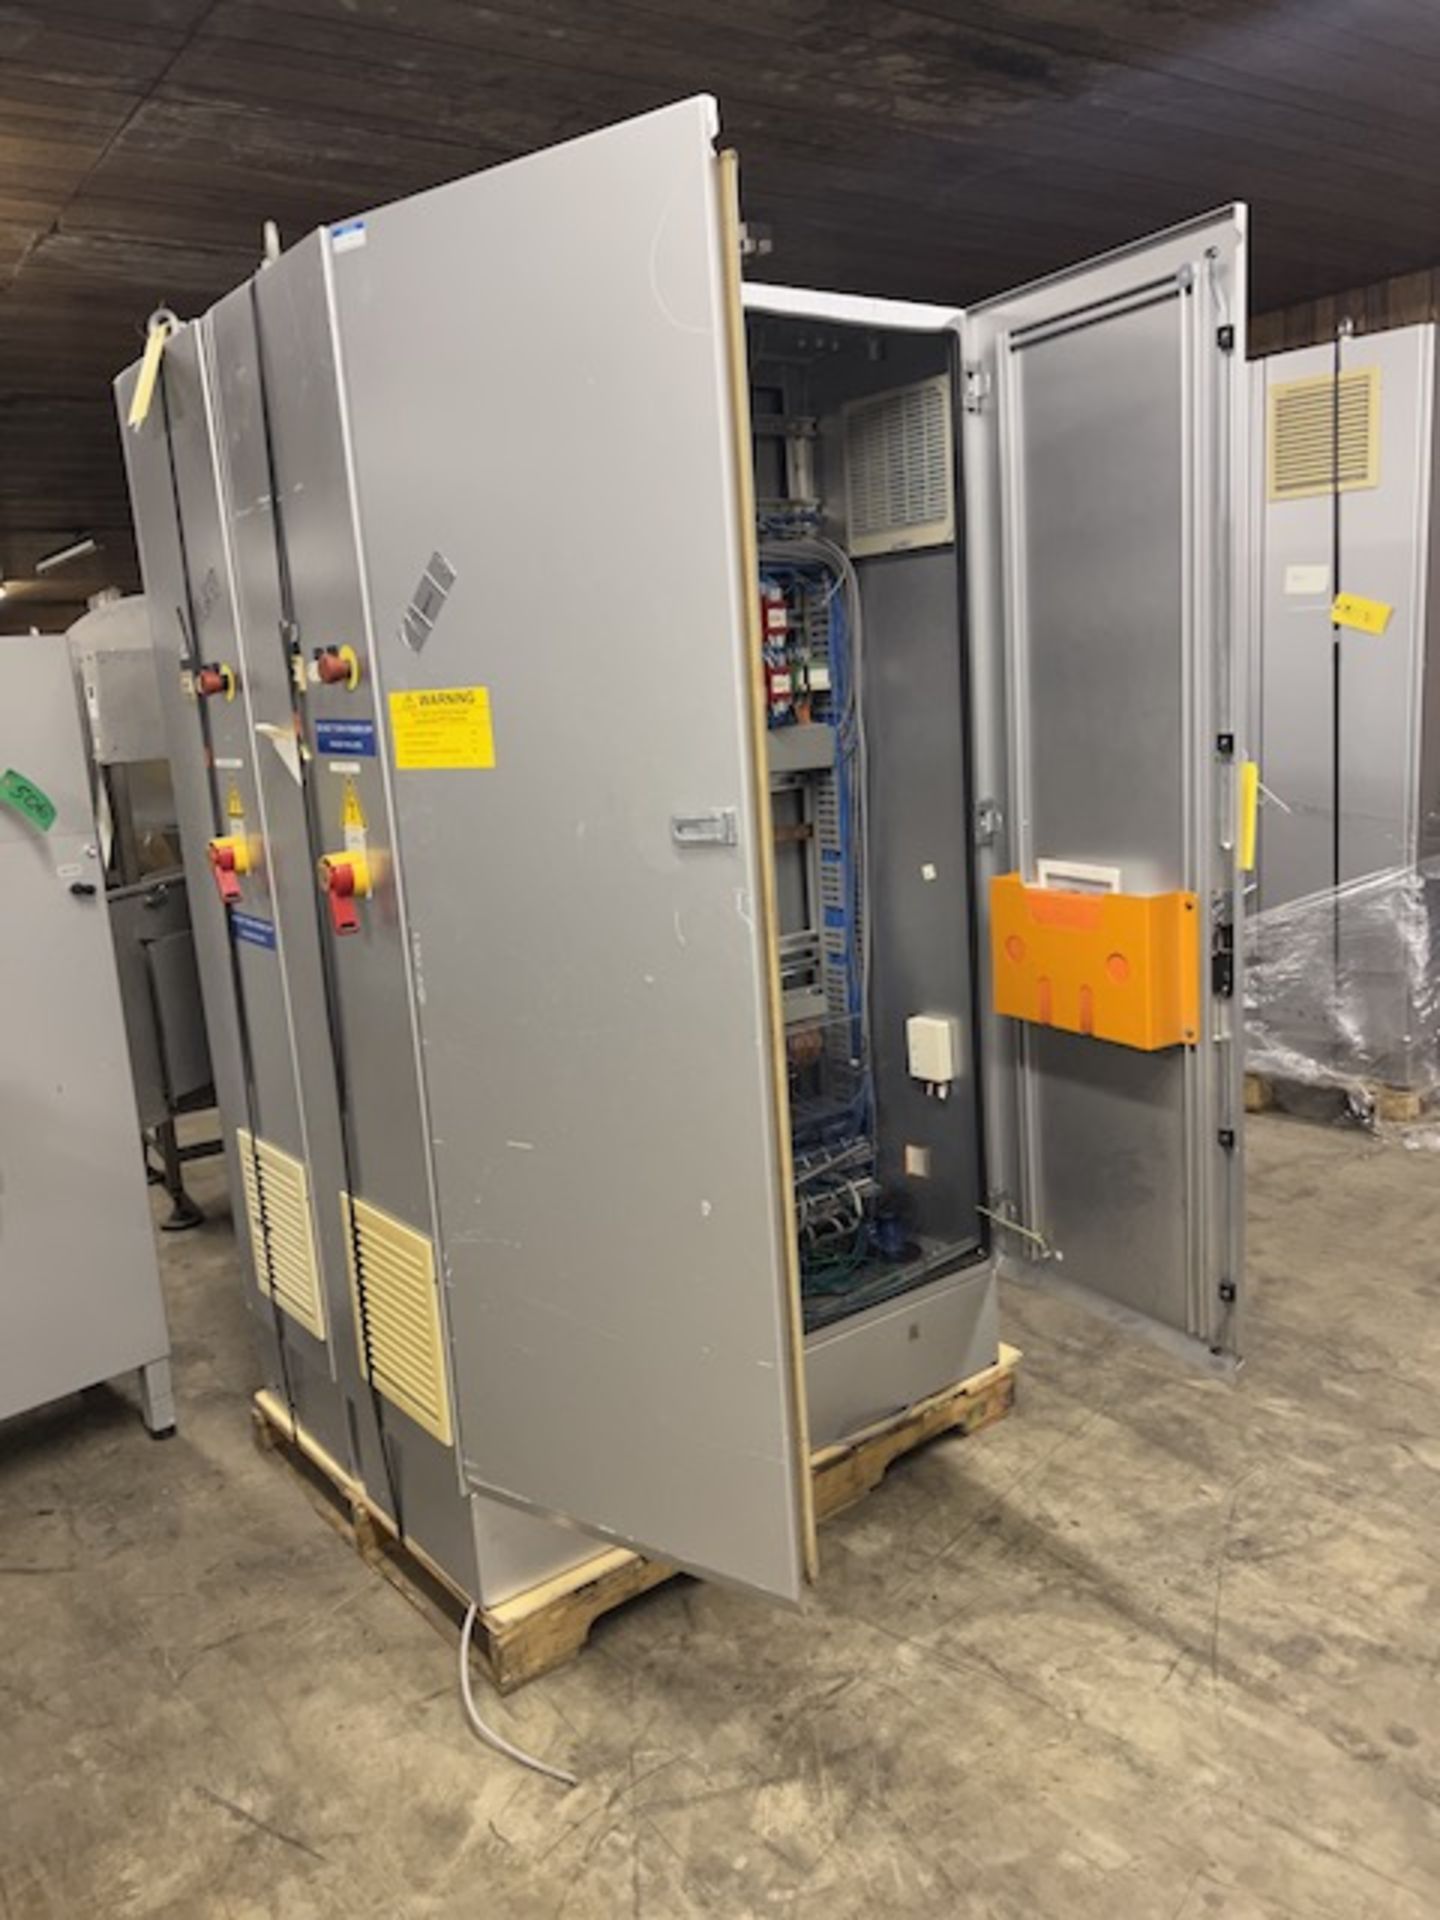 Siemens Power & Drive Cabinet, Located in Deshler, OH - Image 6 of 7